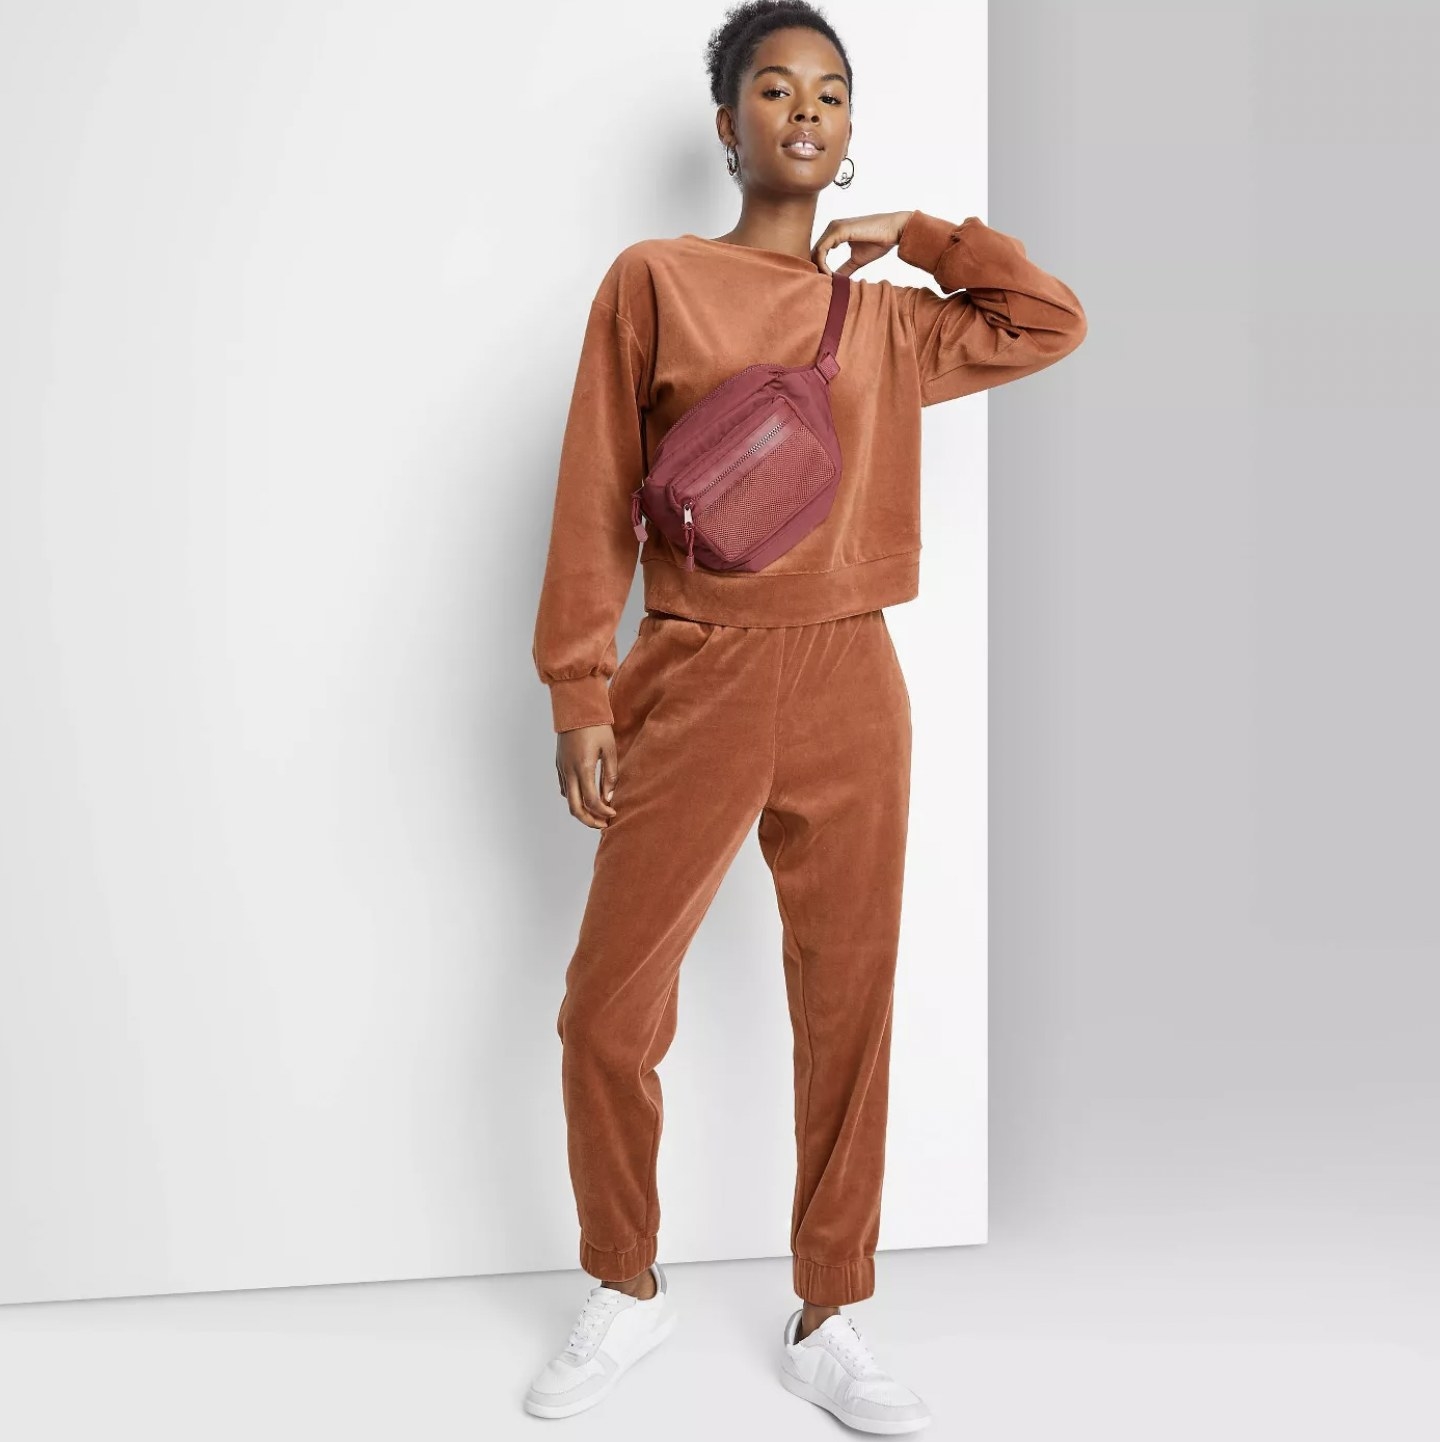 Model in the orange velour joggers with matching long-sleeve sweatshirt